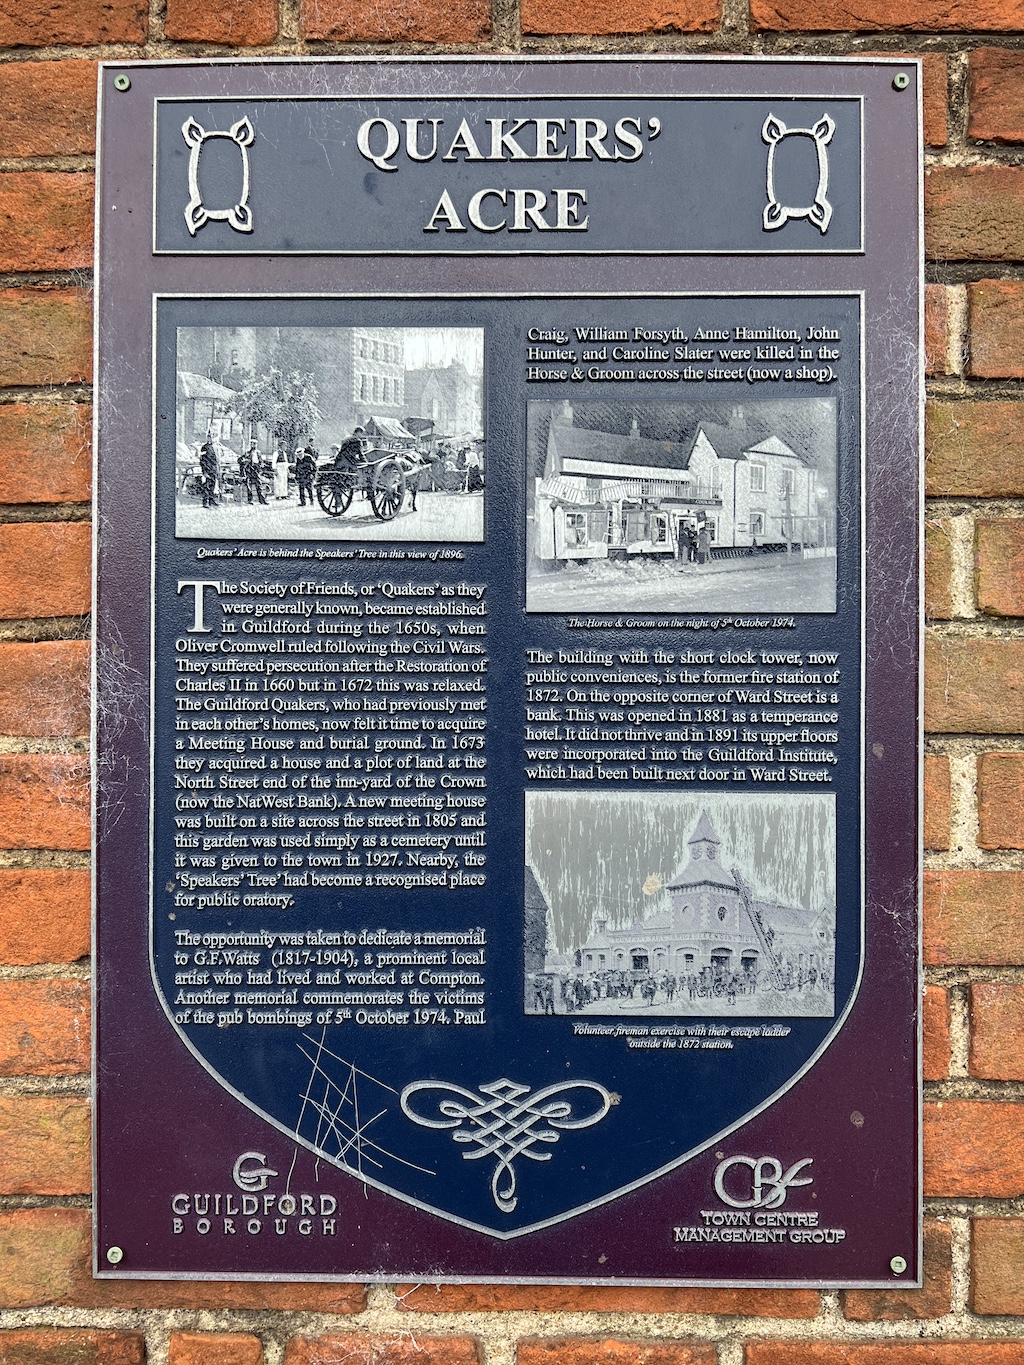 Blue plaque in Guildford for Quakers Acre